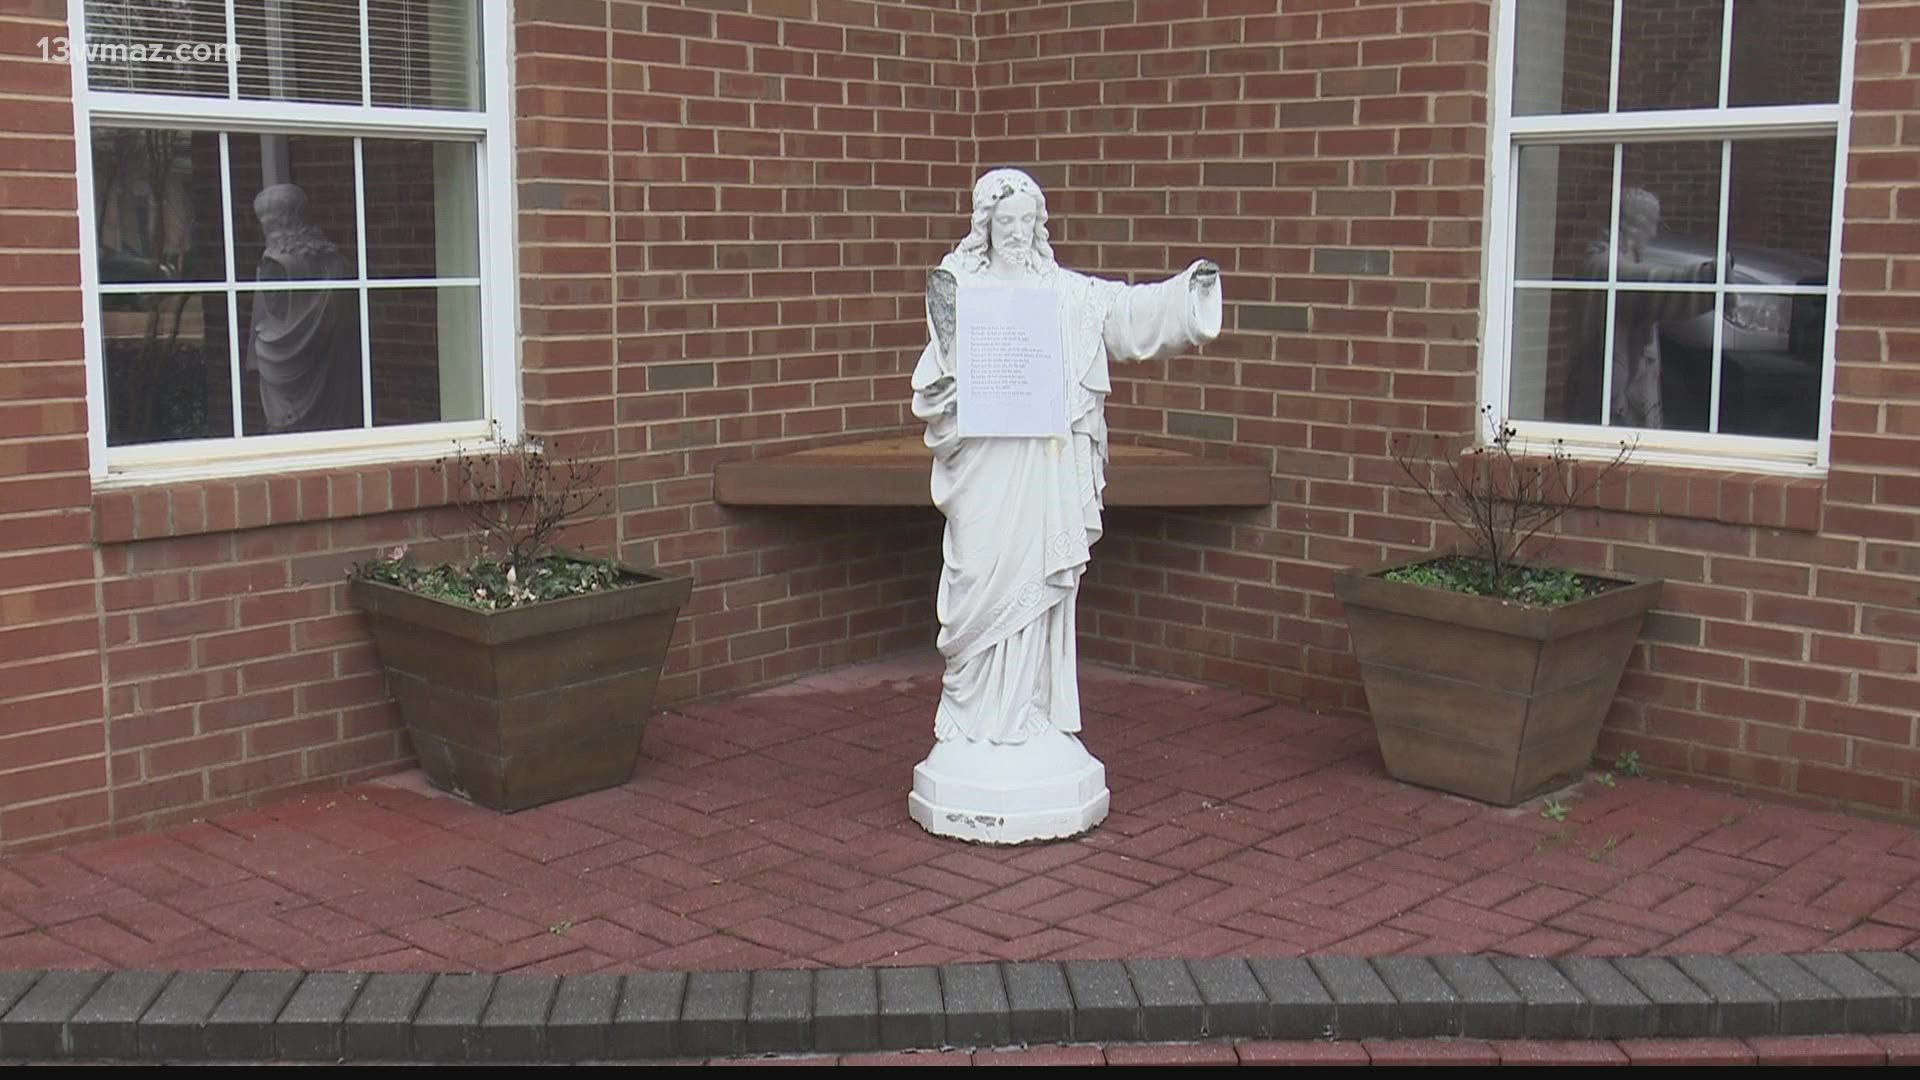 Church staff found the statues lying face down with pieces scattered across the sidewalk.